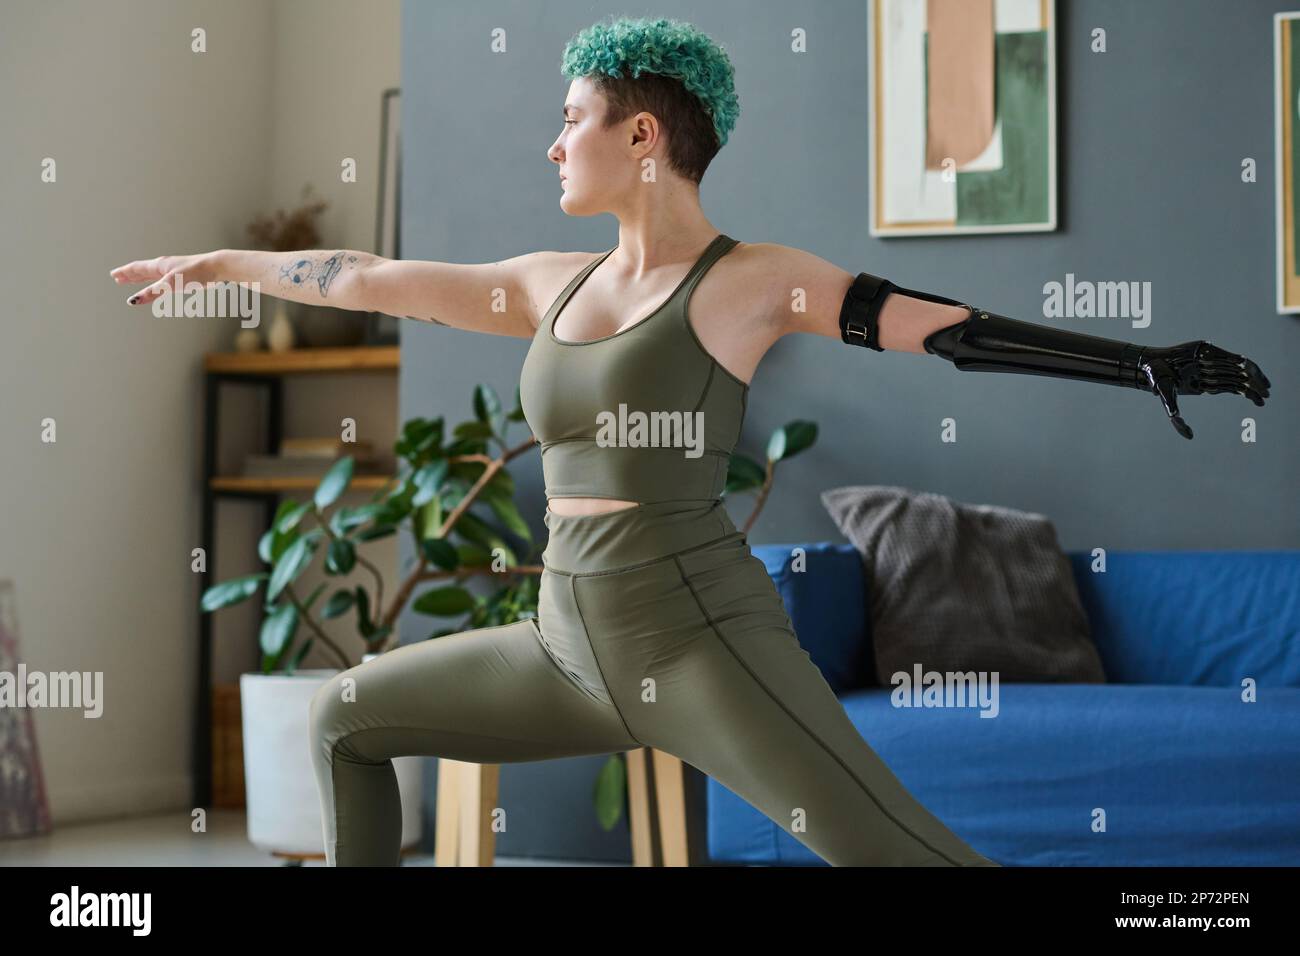 Young woman with prosthetic arm doing stretching exercises during morning training at home Stock Photo